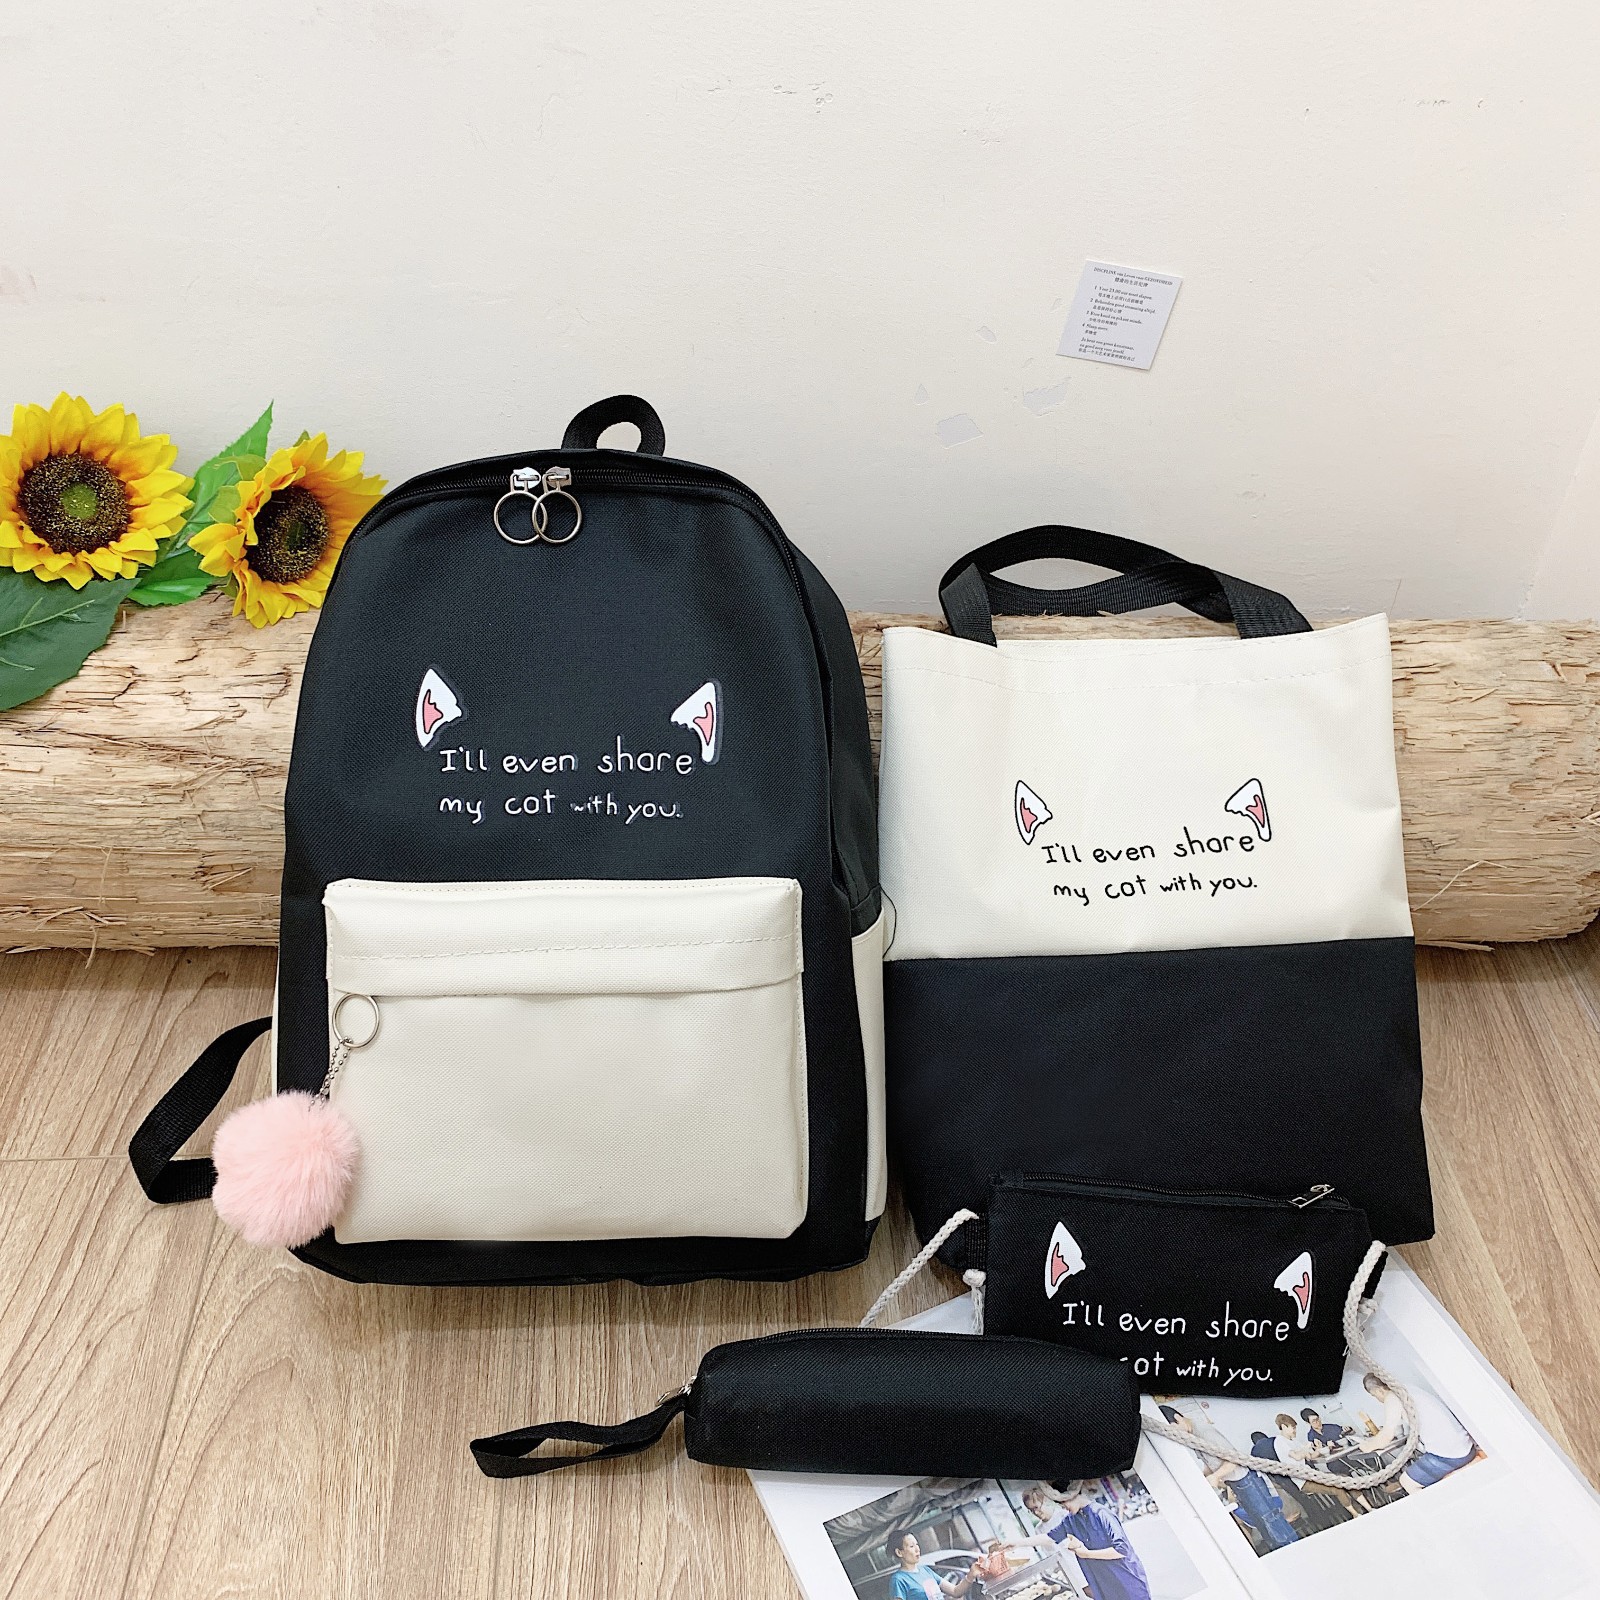 Internet Celebrity Bags Women's Preppy Style Four-Piece Contrast Color Backpack Fashion Large Capacity High School Junior High School School Bag Backpack